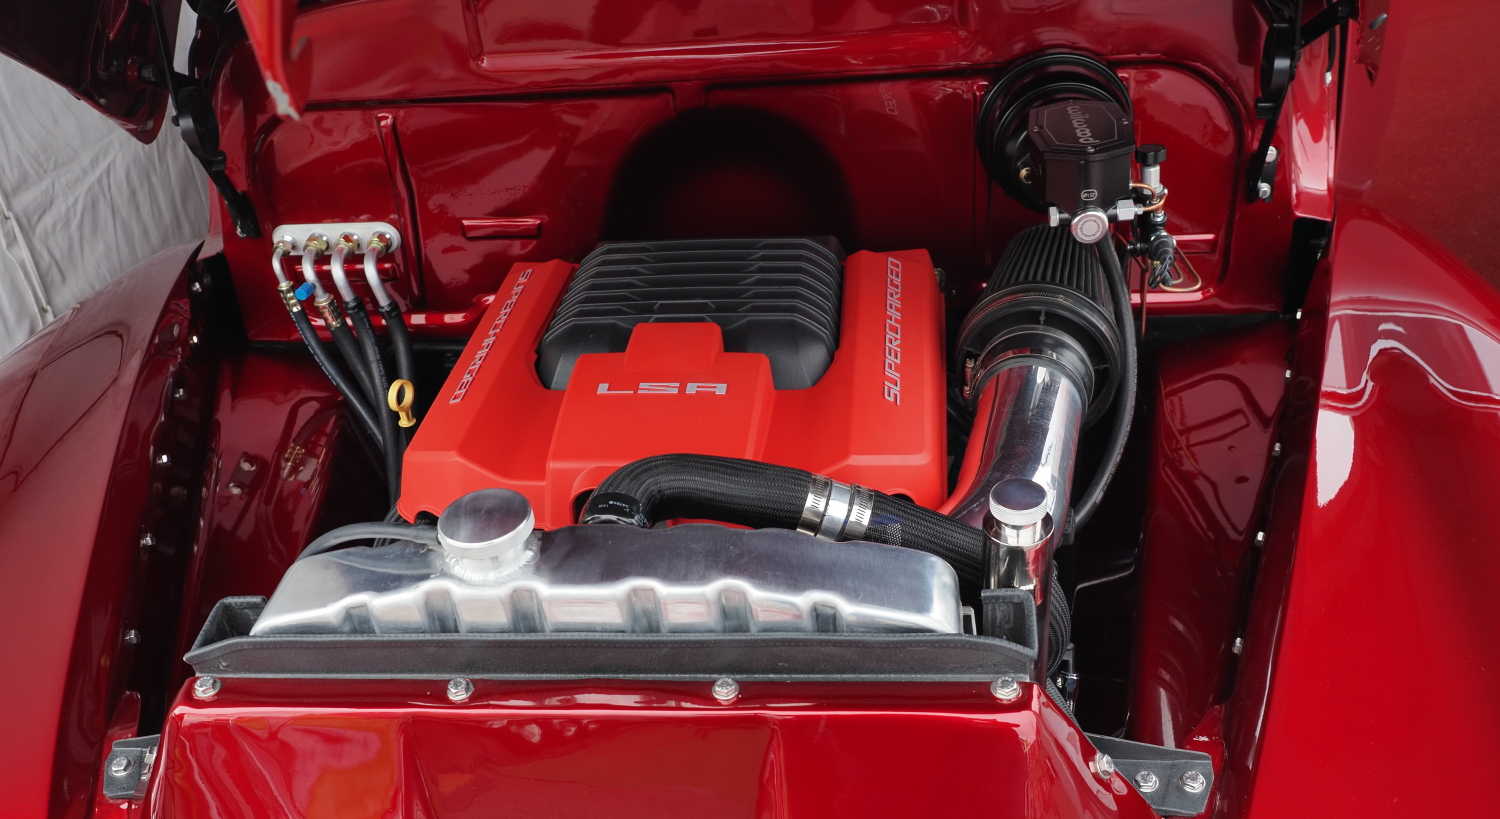 The LSA V-8 fits nicely in the truck's engine bay.